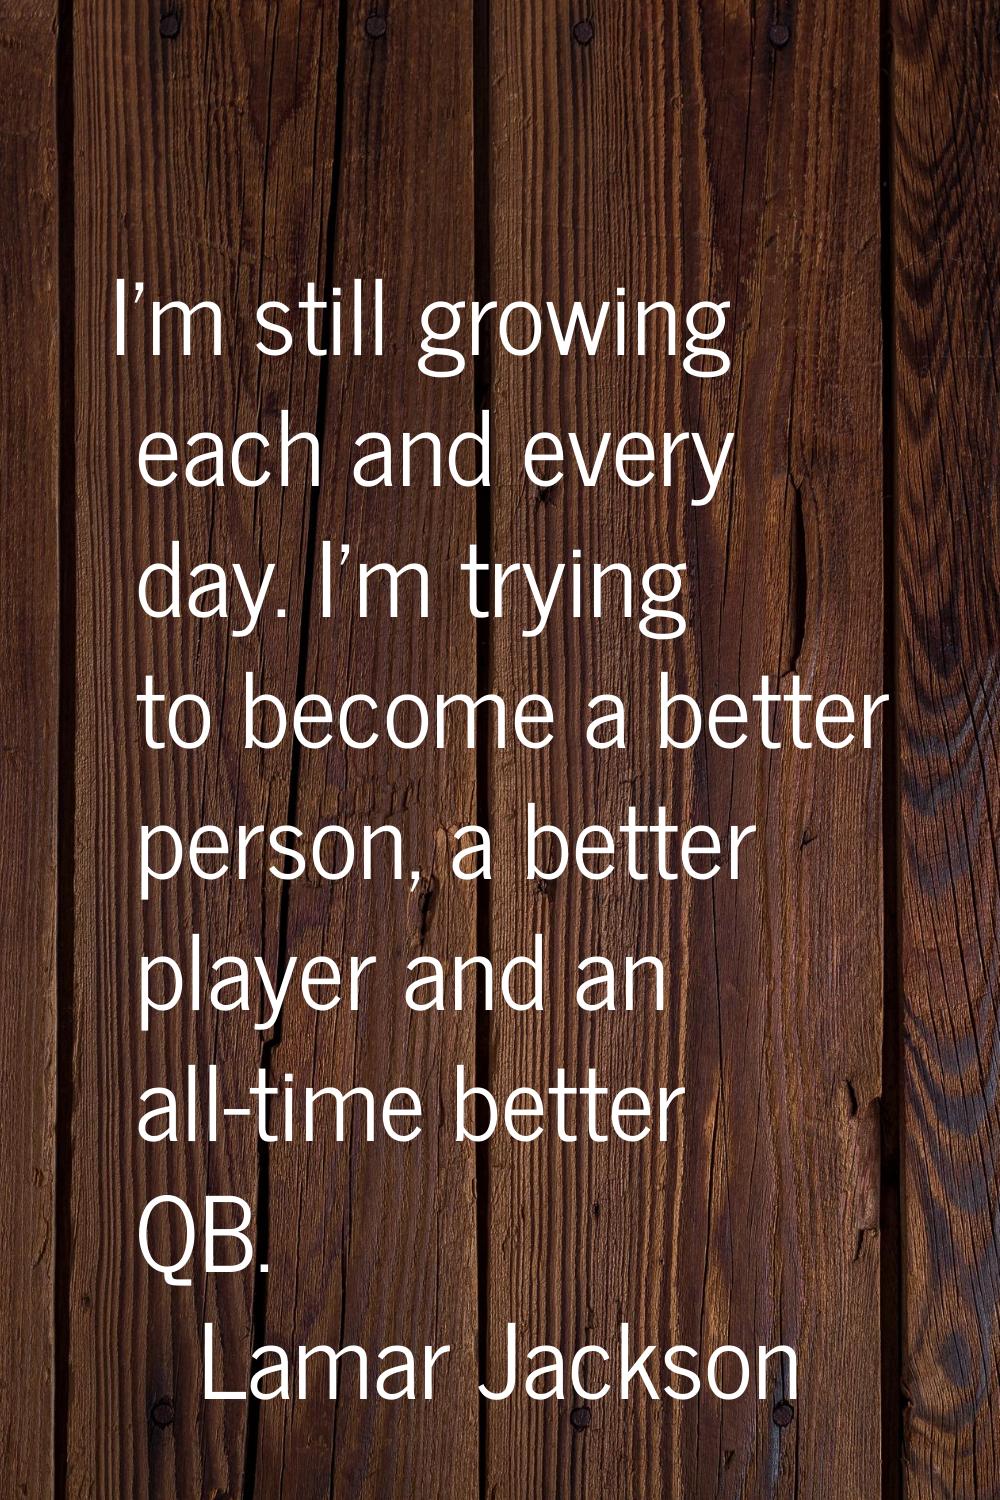 I'm still growing each and every day. I'm trying to become a better person, a better player and an 